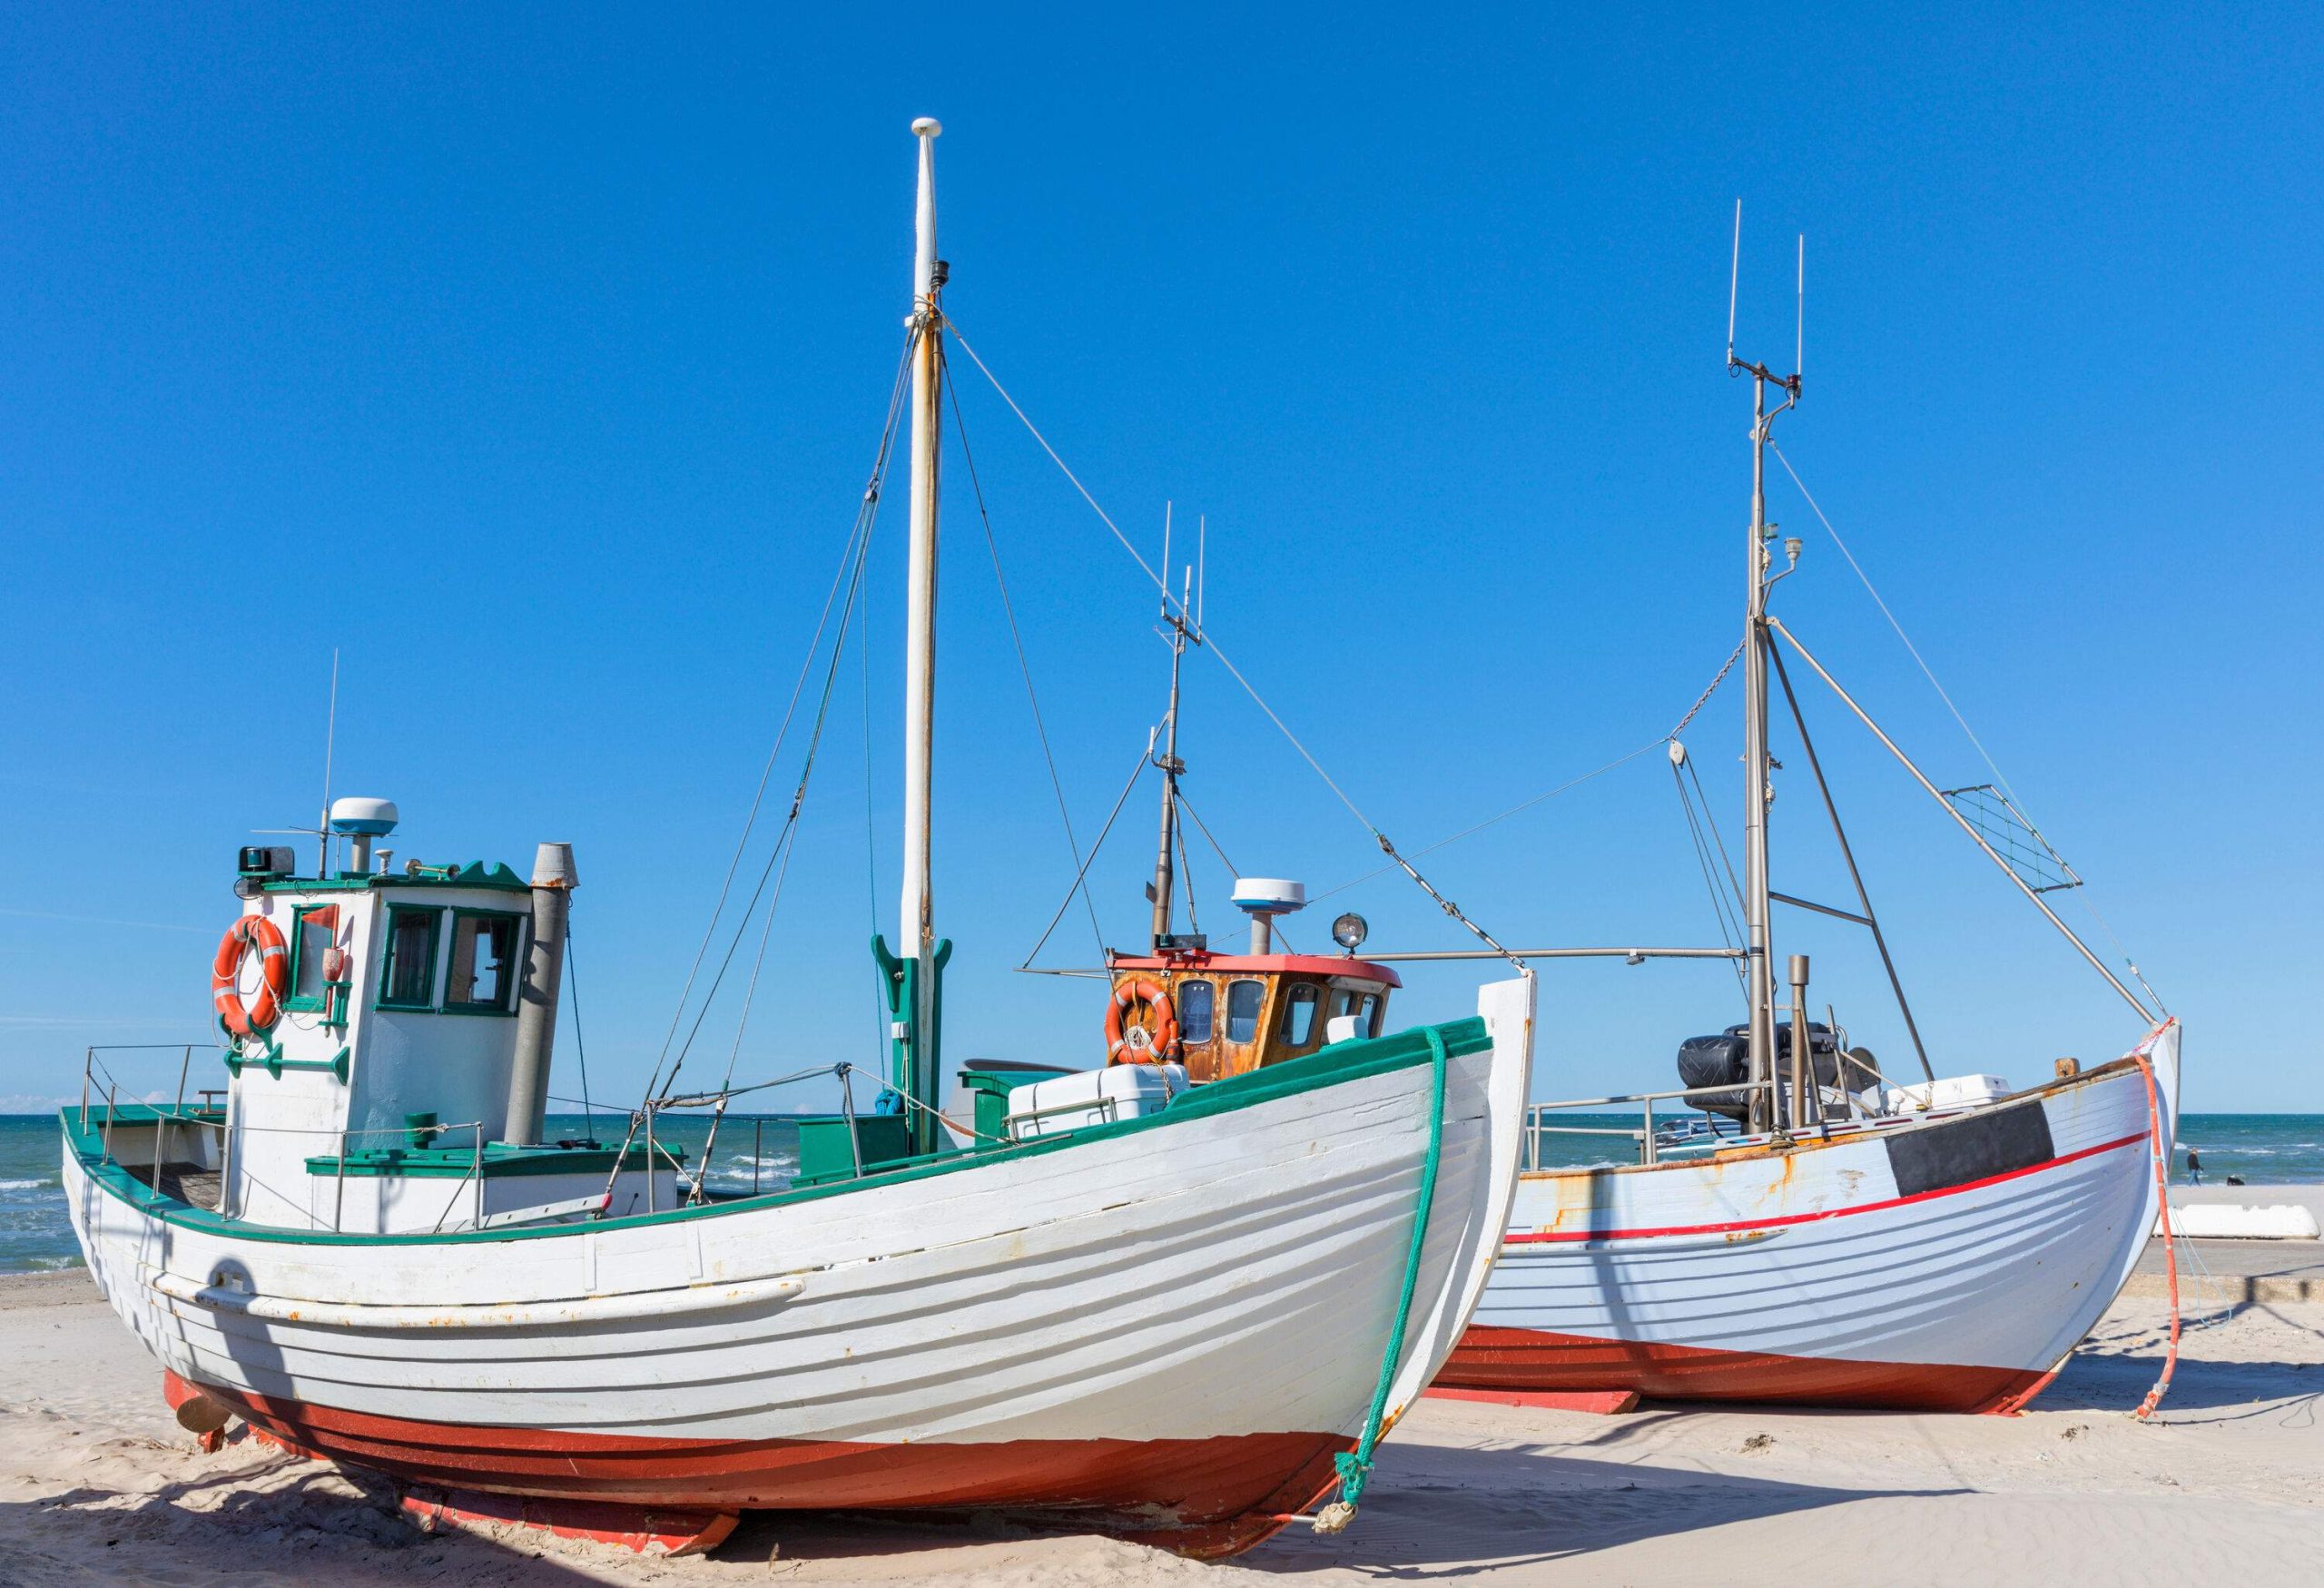 Two fishing boats on fine white sands against the clear blue sky.